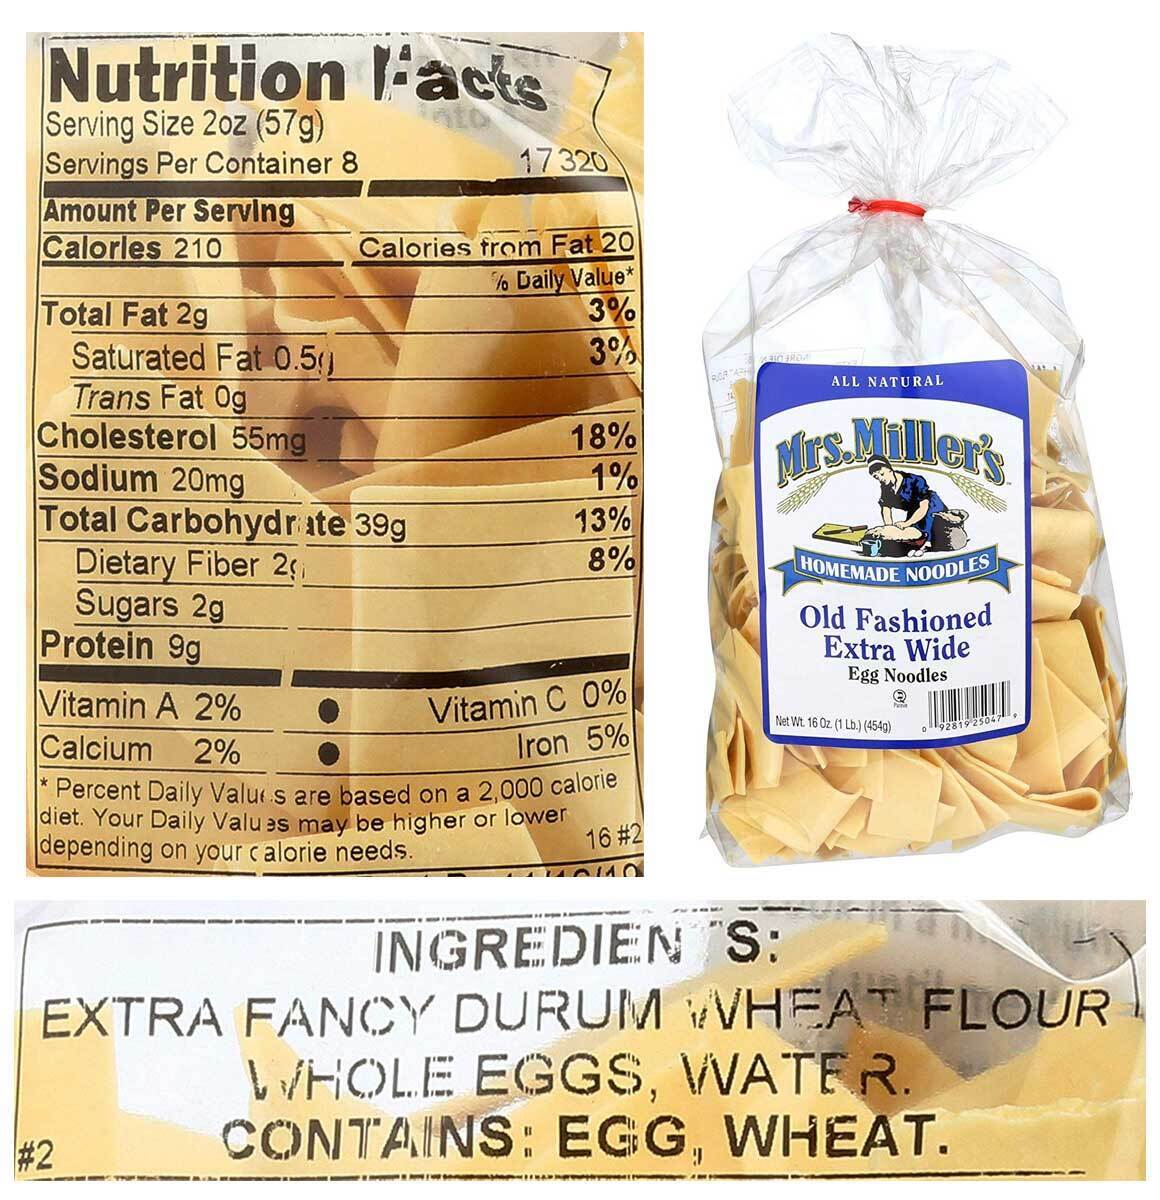 Mrs Millers Egg Noodles Old Fashioned Extra Wide Homemade - 16 Oz - Pack of 6 Mrs. Miller's Does not apply - фотография #3